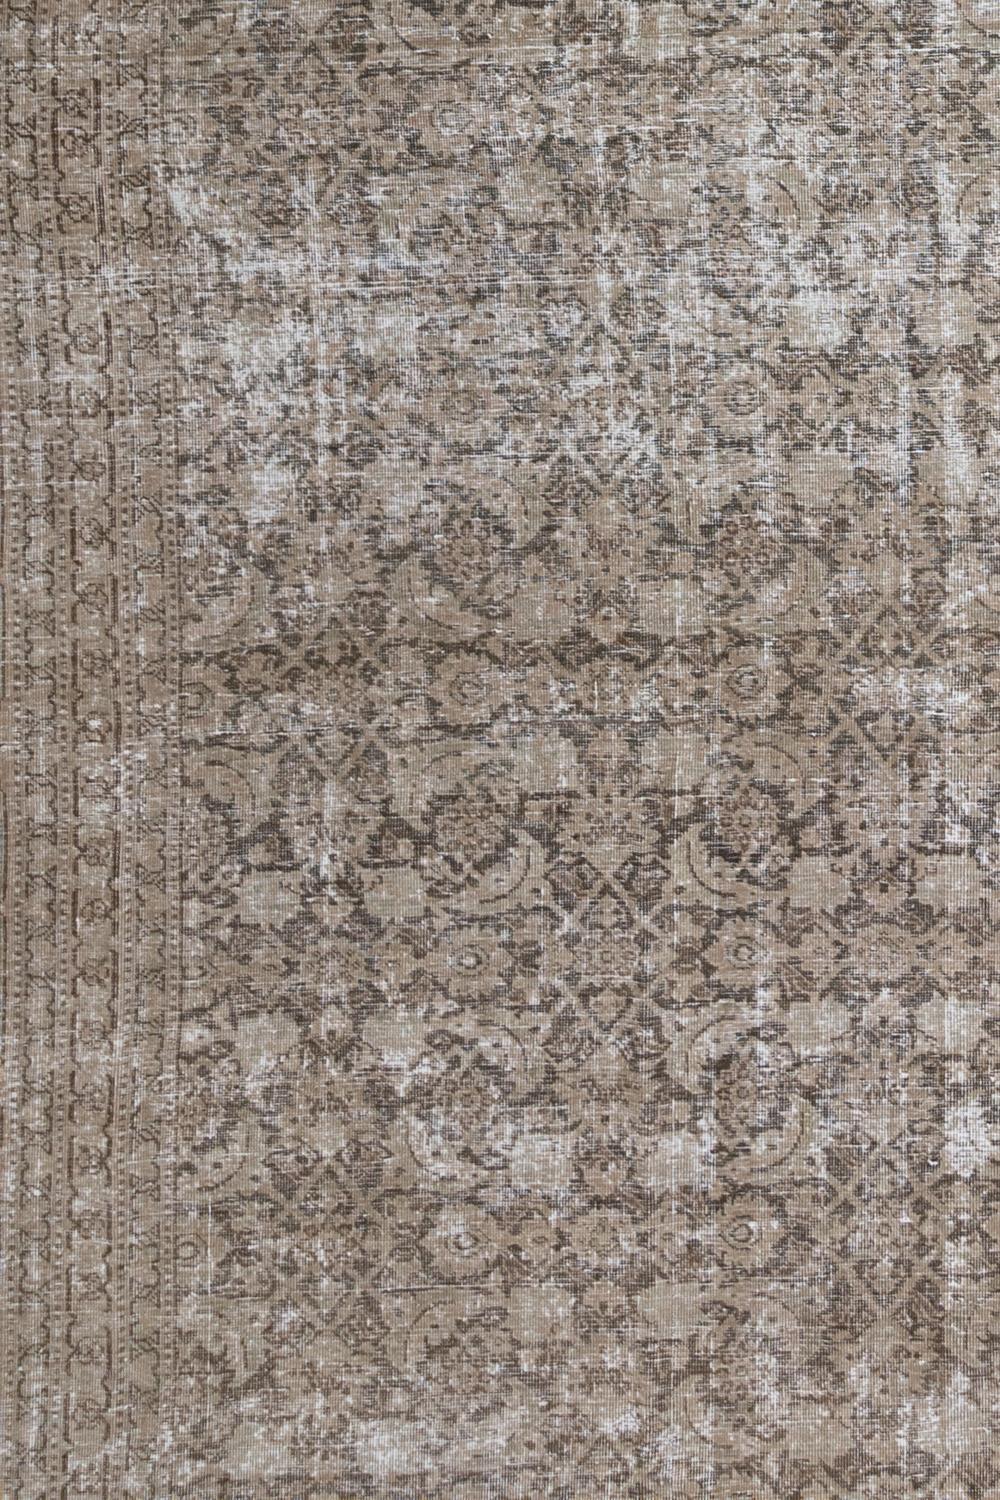 Age: 1920

Pile: Low

16800

Material: Wool on Cotton

Classic vintage Persian Tabriz with an all over herati pattern. Portobello toned field with a gray design that is a designer's dream for styling. Safe for high traffic with a heavy feel.